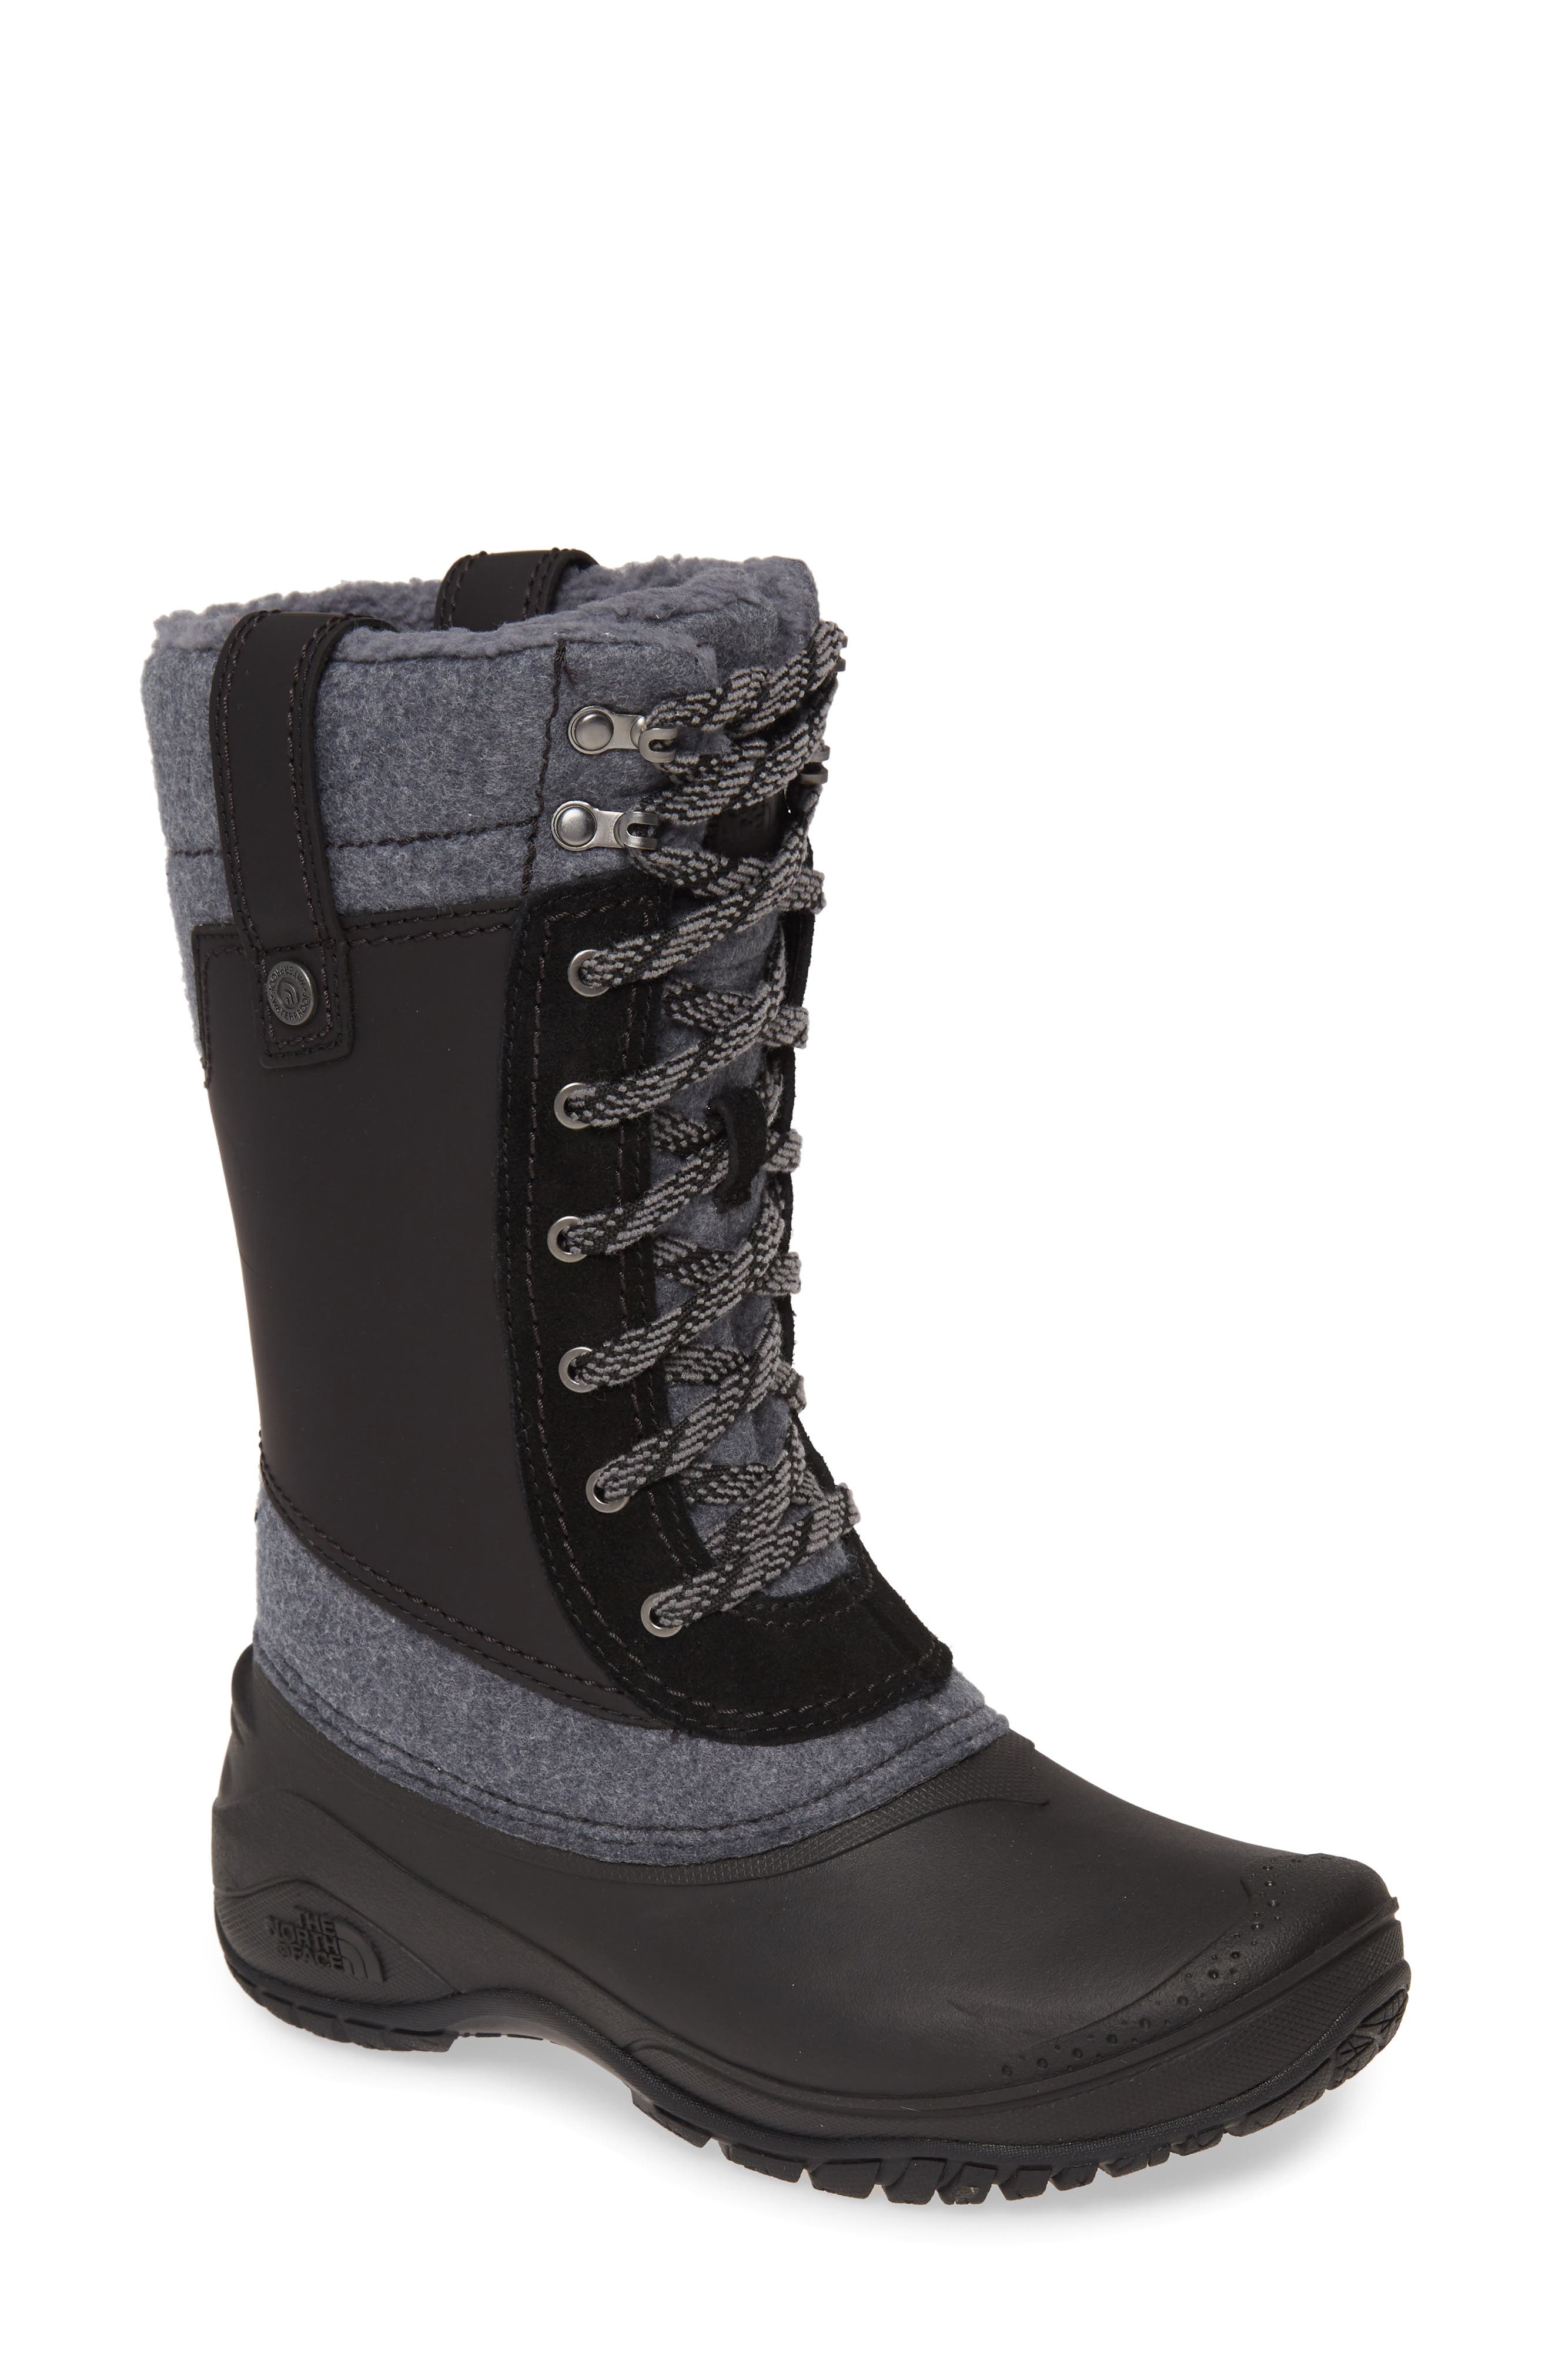 Women's The North Face Boots | Nordstrom